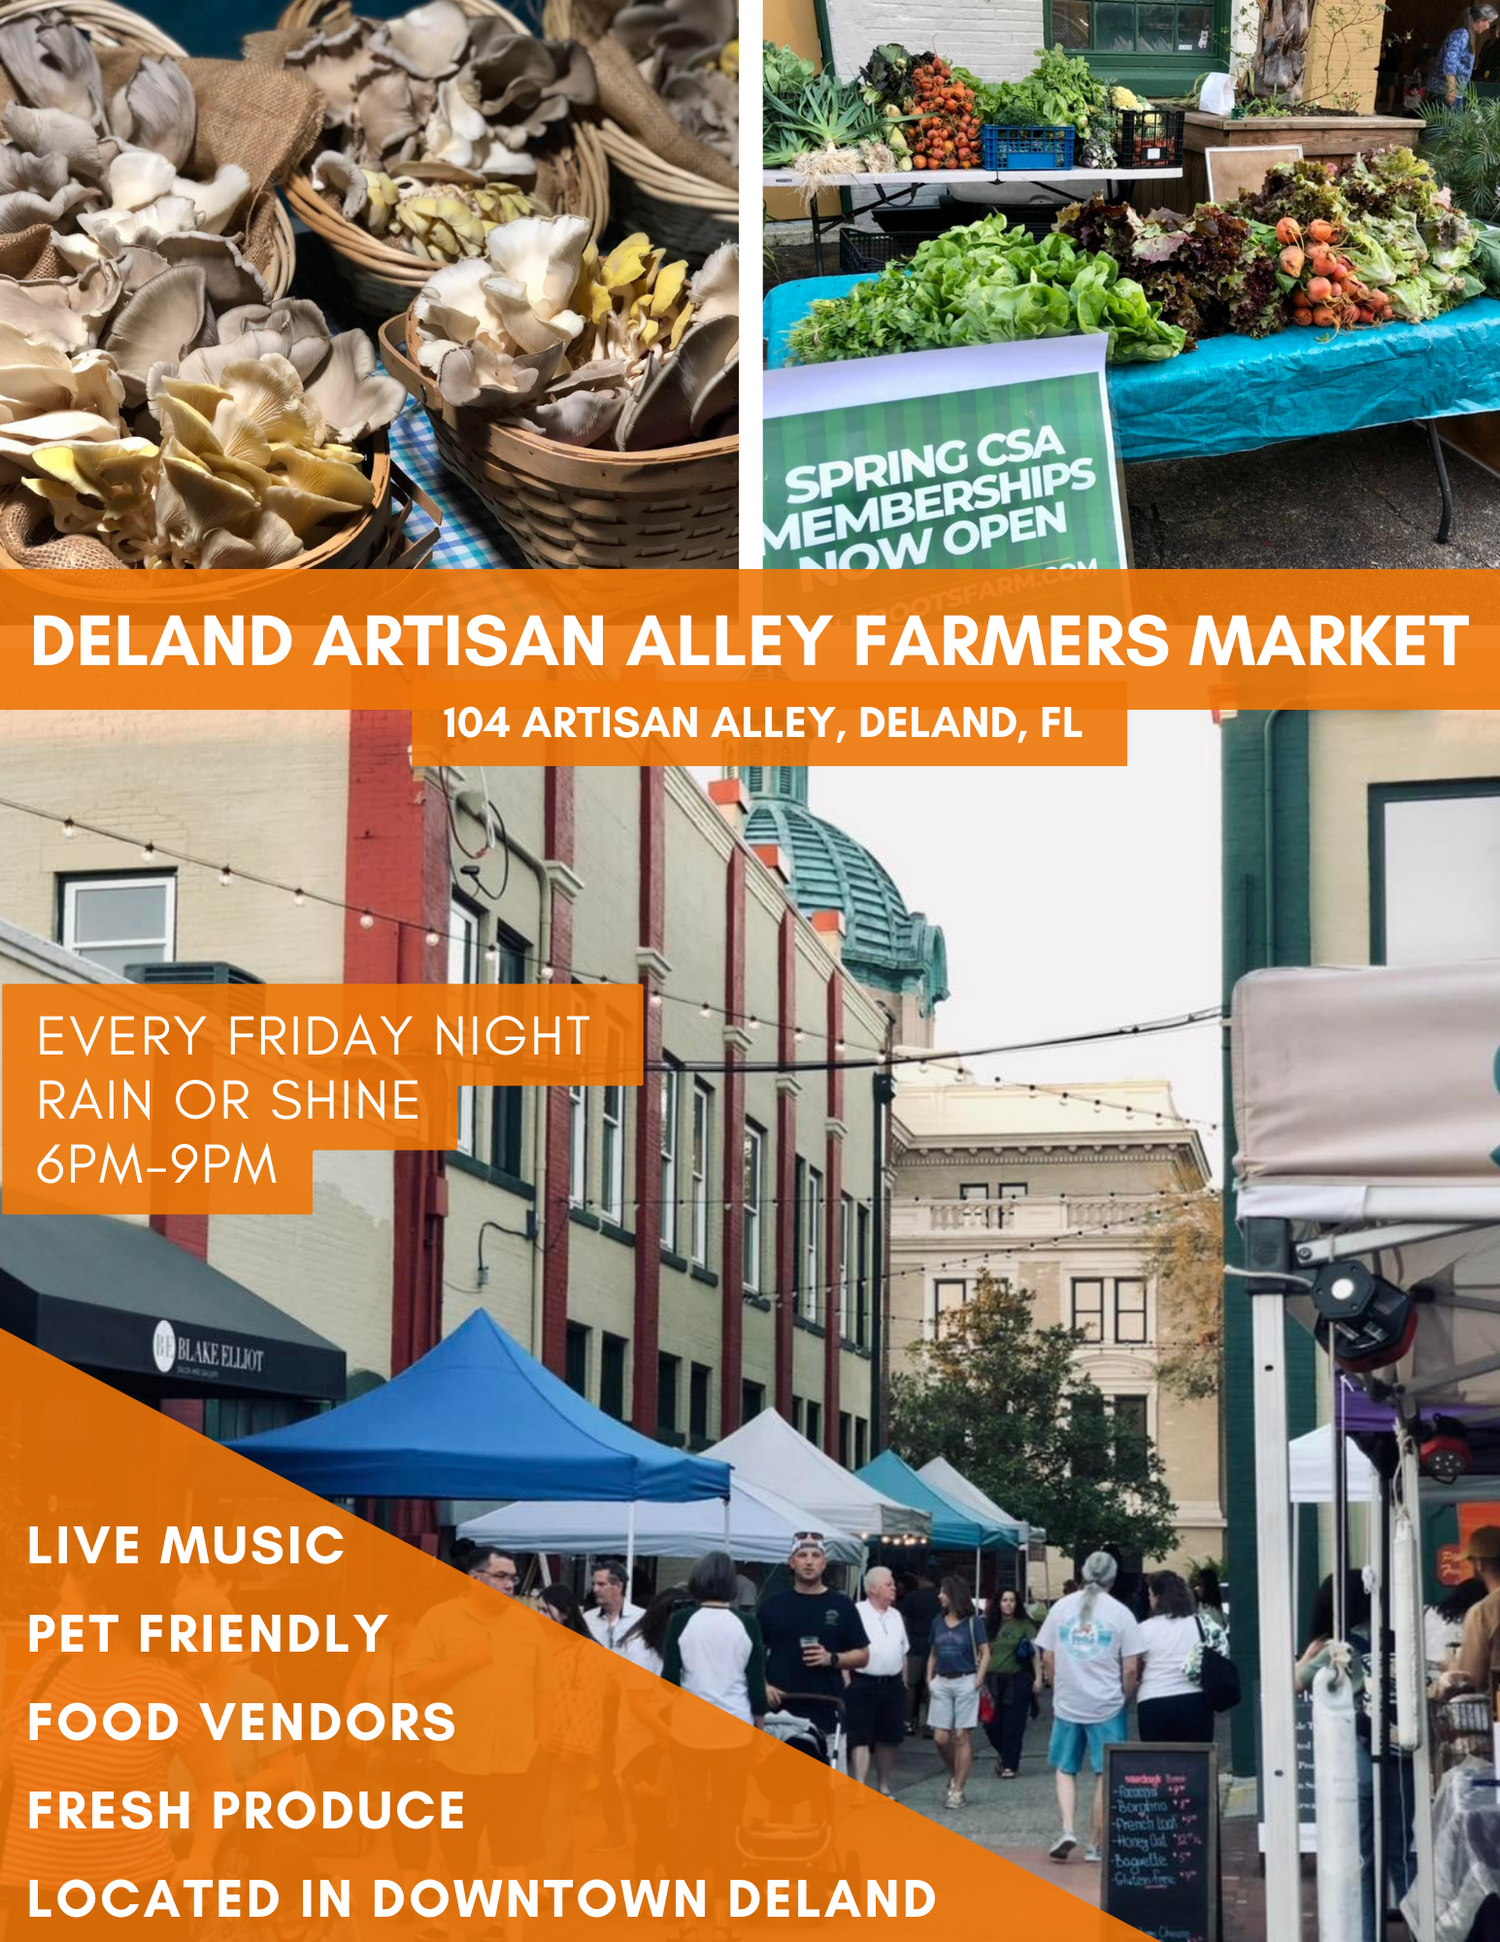 Advertising for Deland Artisan Alley Farmers market for those looking for Lions Mane and Oyster mushrooms